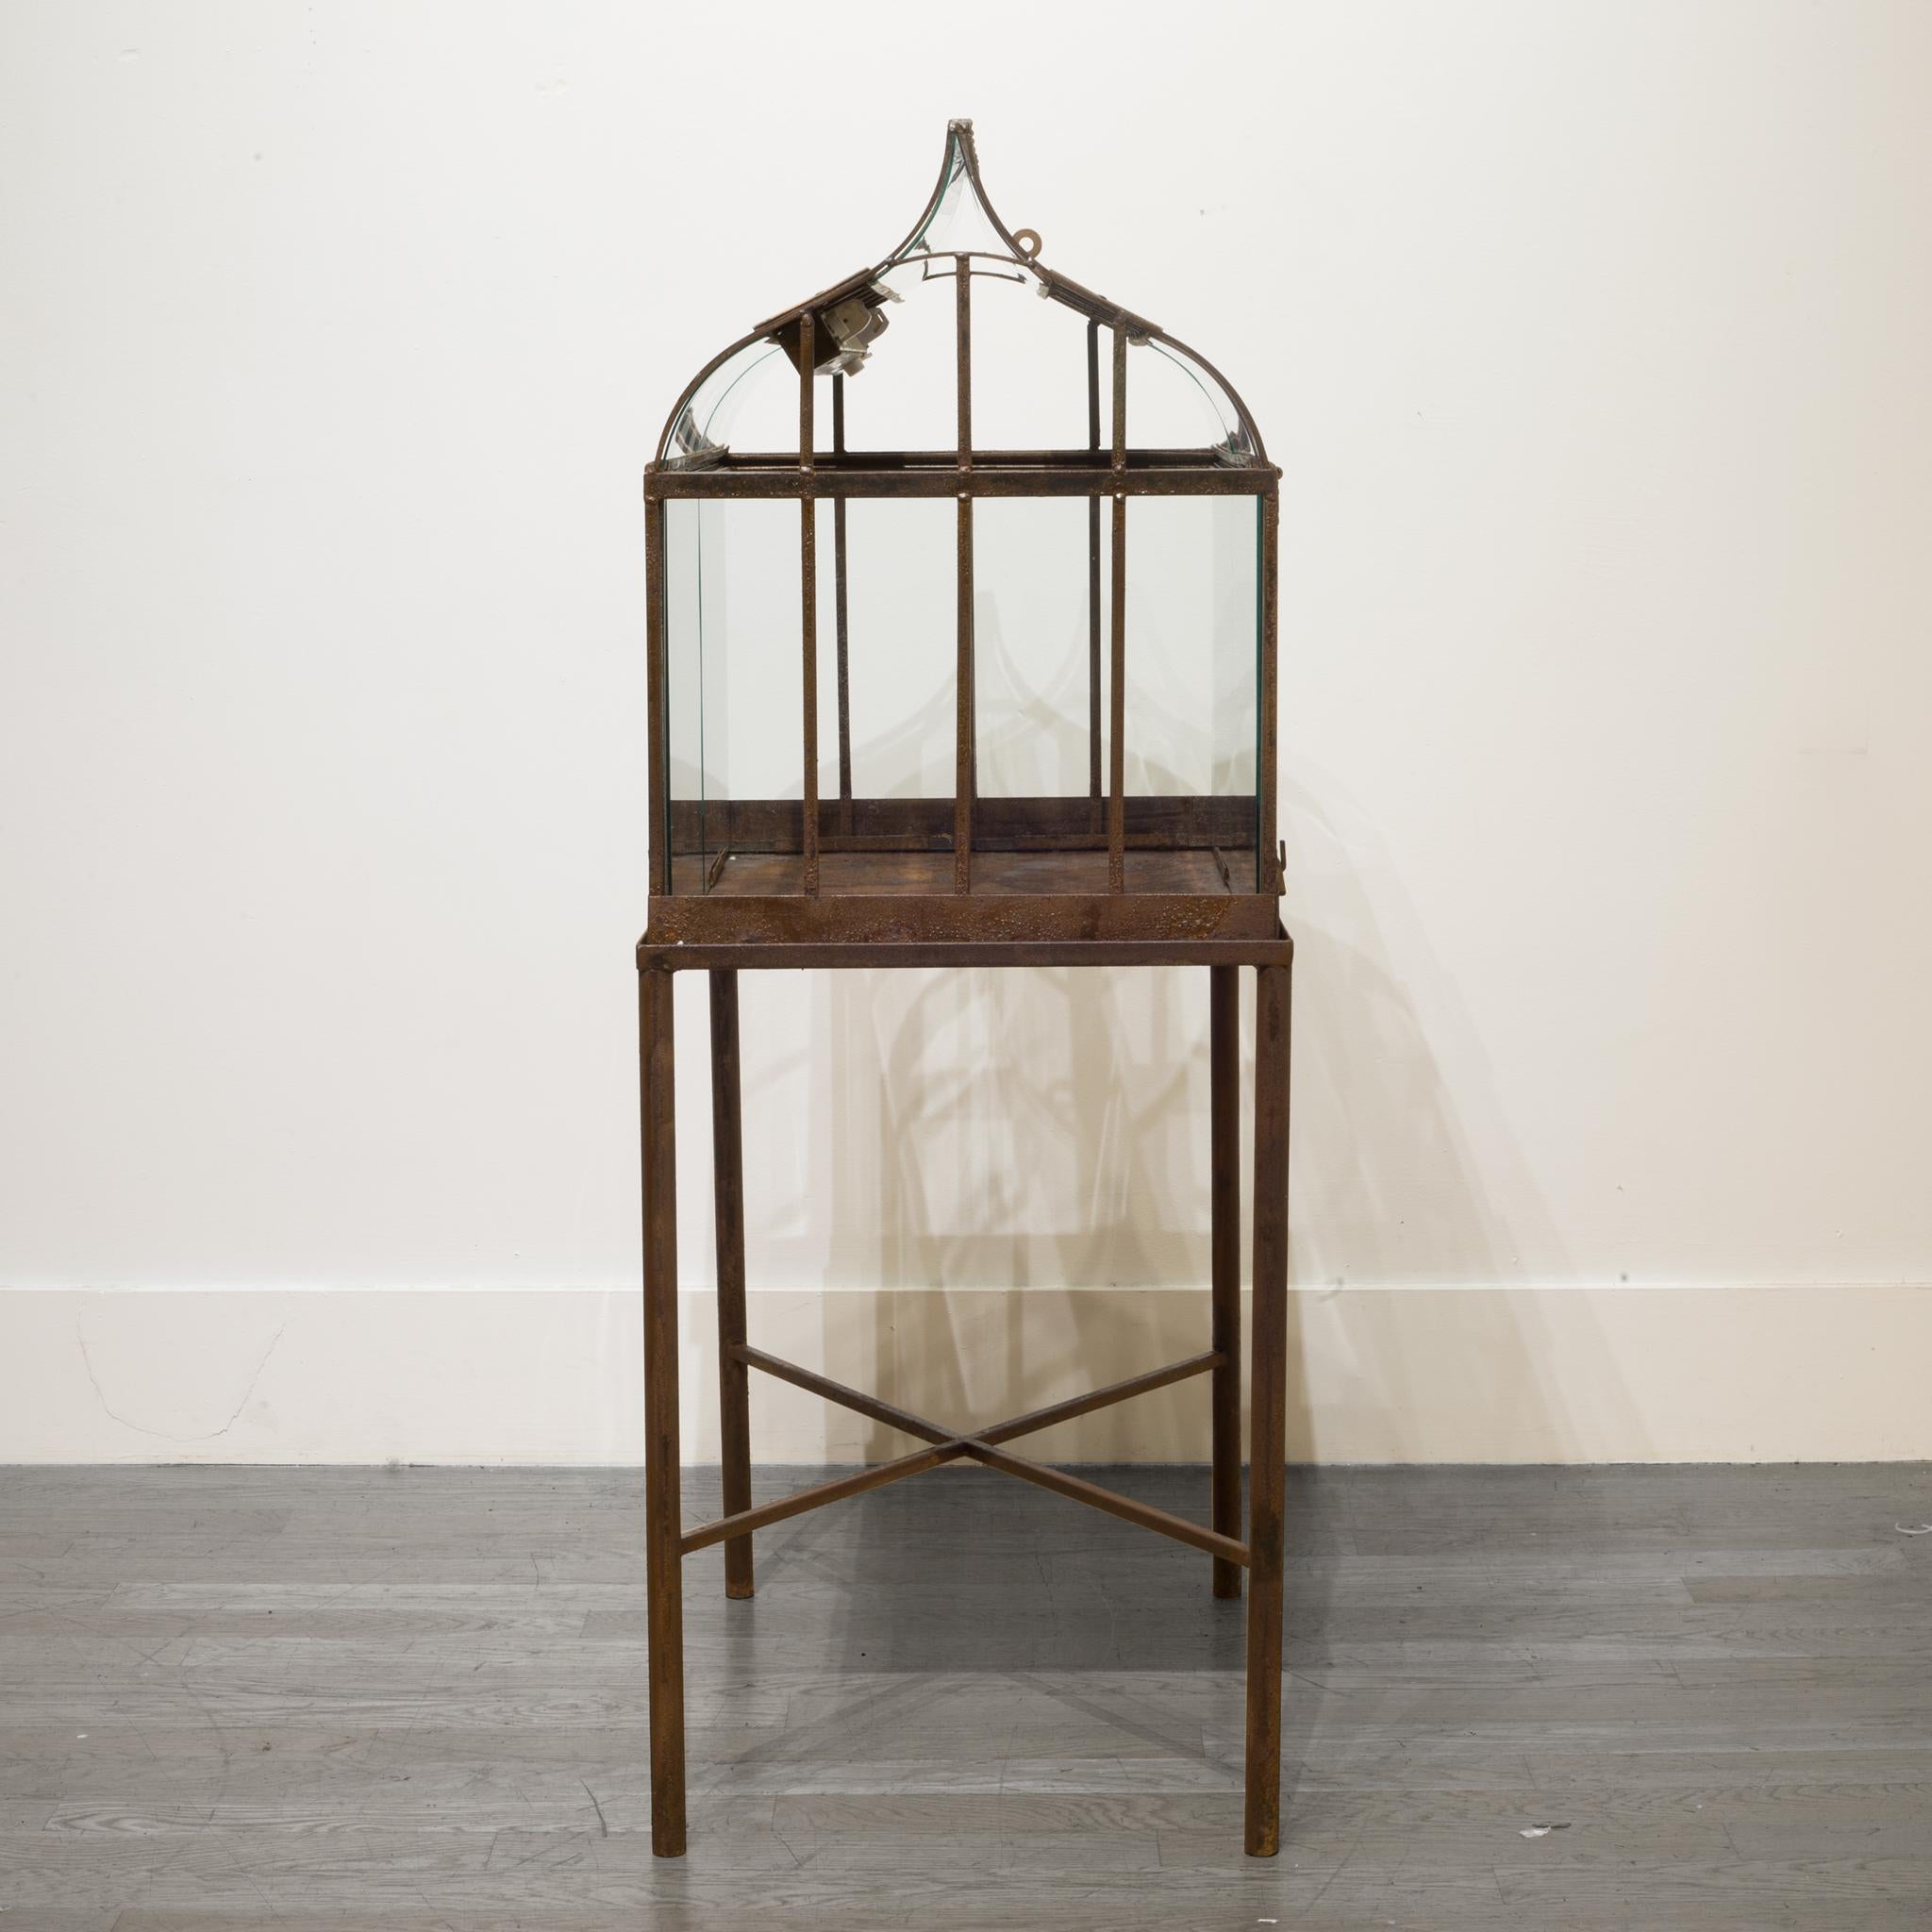 American Turn of the Century Antique Wrought Iron Wardian Case on Stand, circa 1900